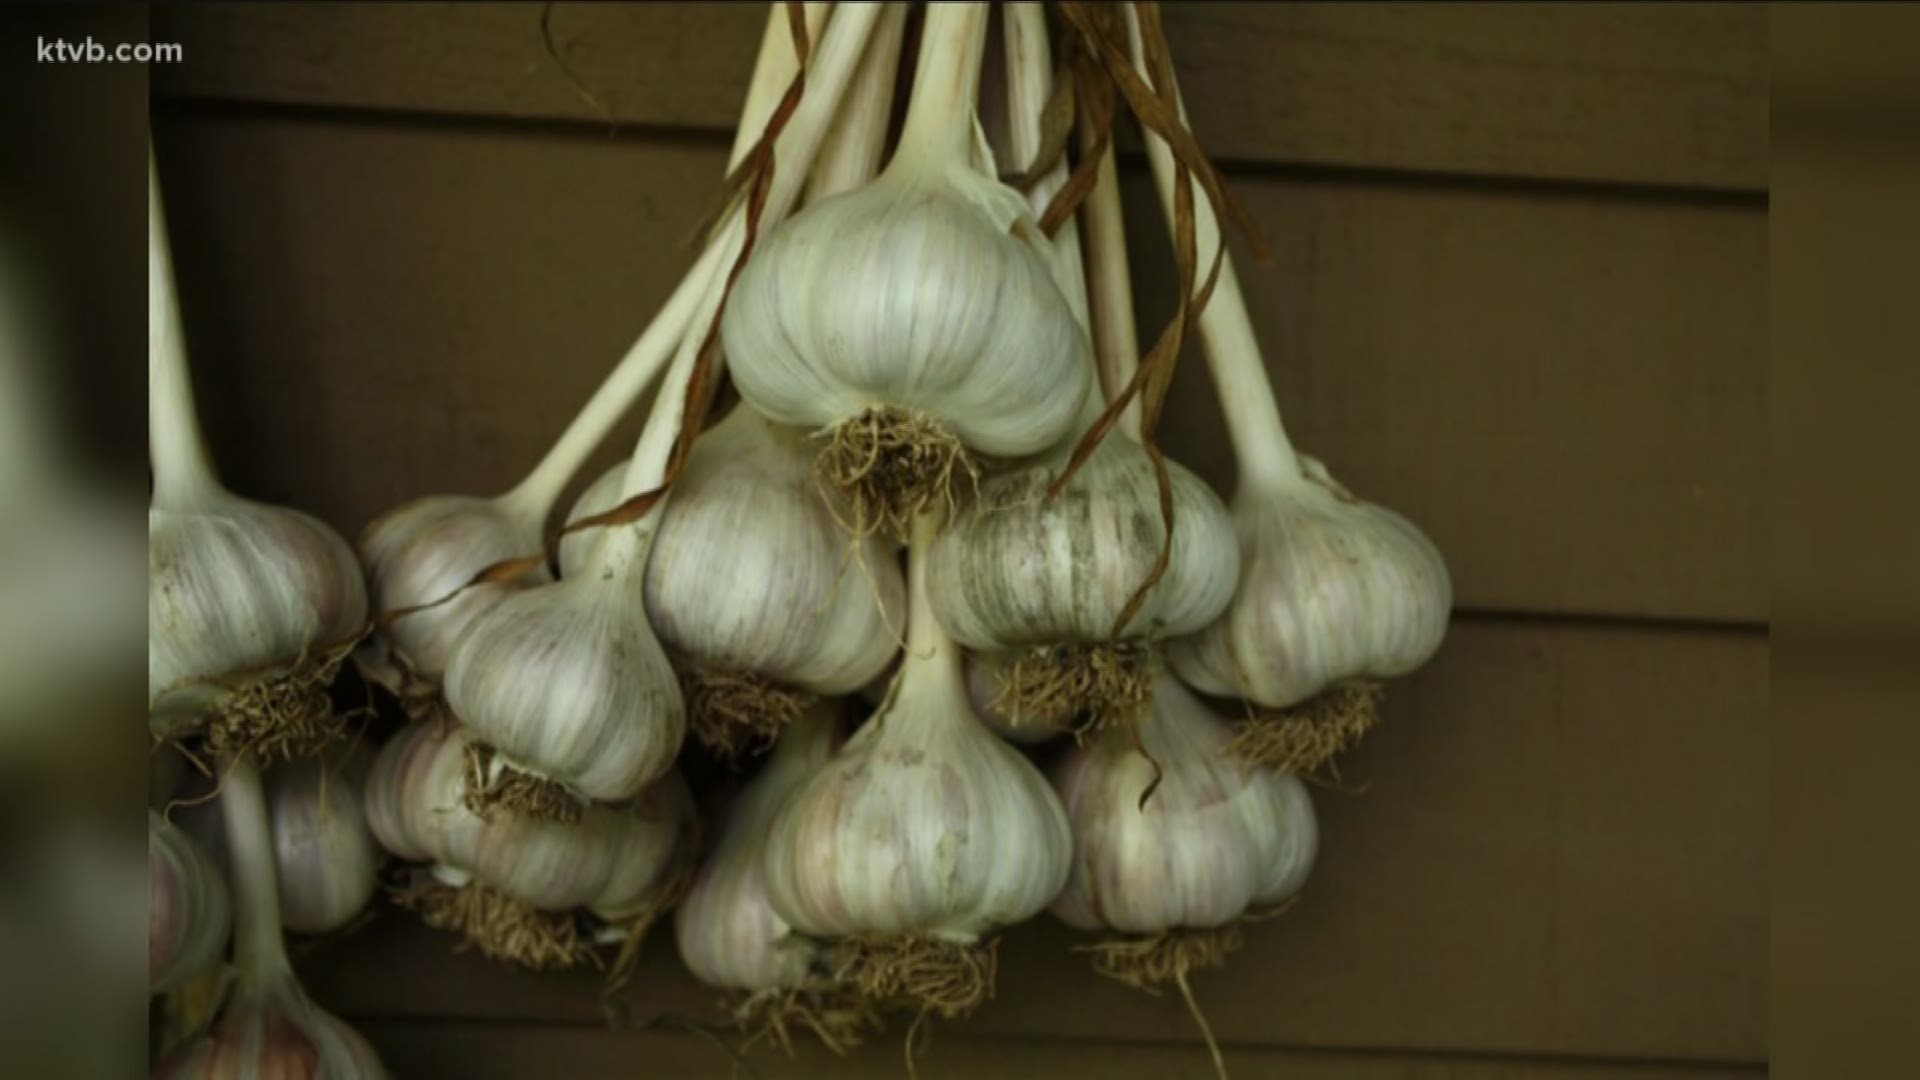 Jim Duthie gives us a little taste of garlic and how you can grow it.